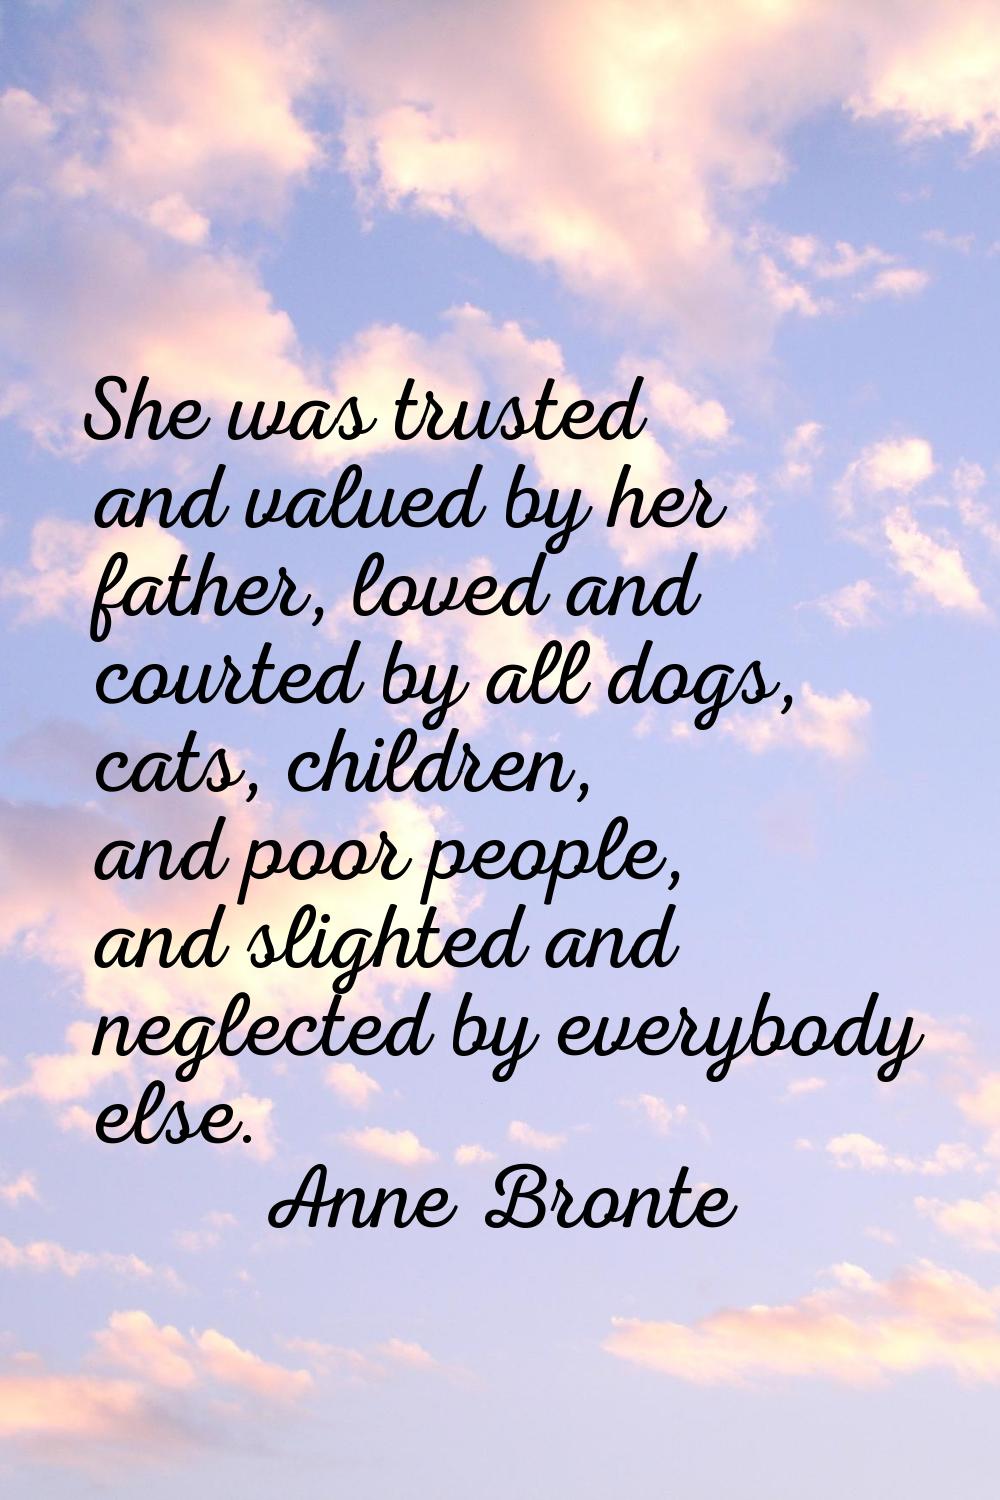 She was trusted and valued by her father, loved and courted by all dogs, cats, children, and poor p